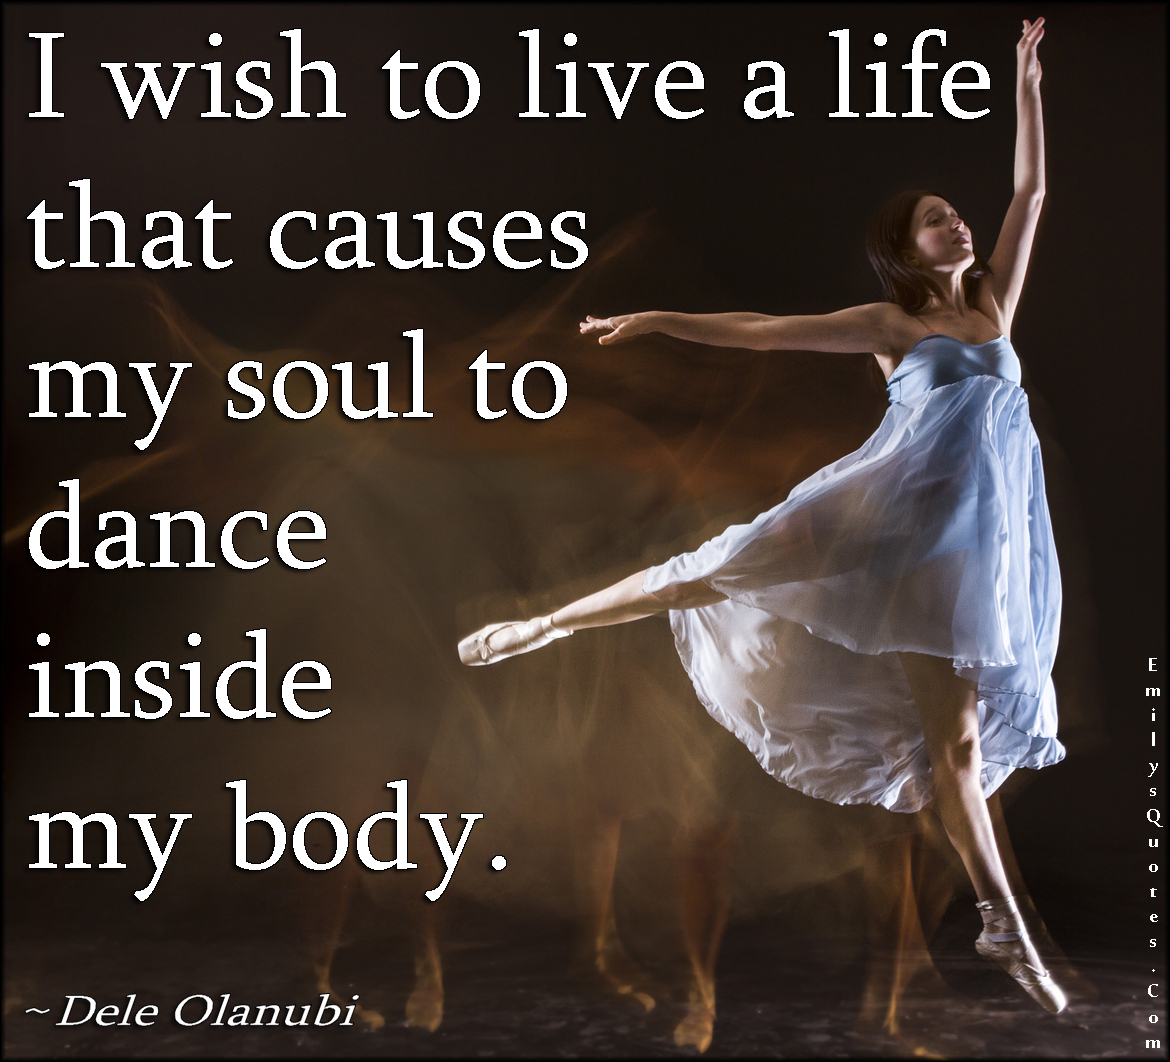 I wish to live a life that causes my soul to dance inside my body